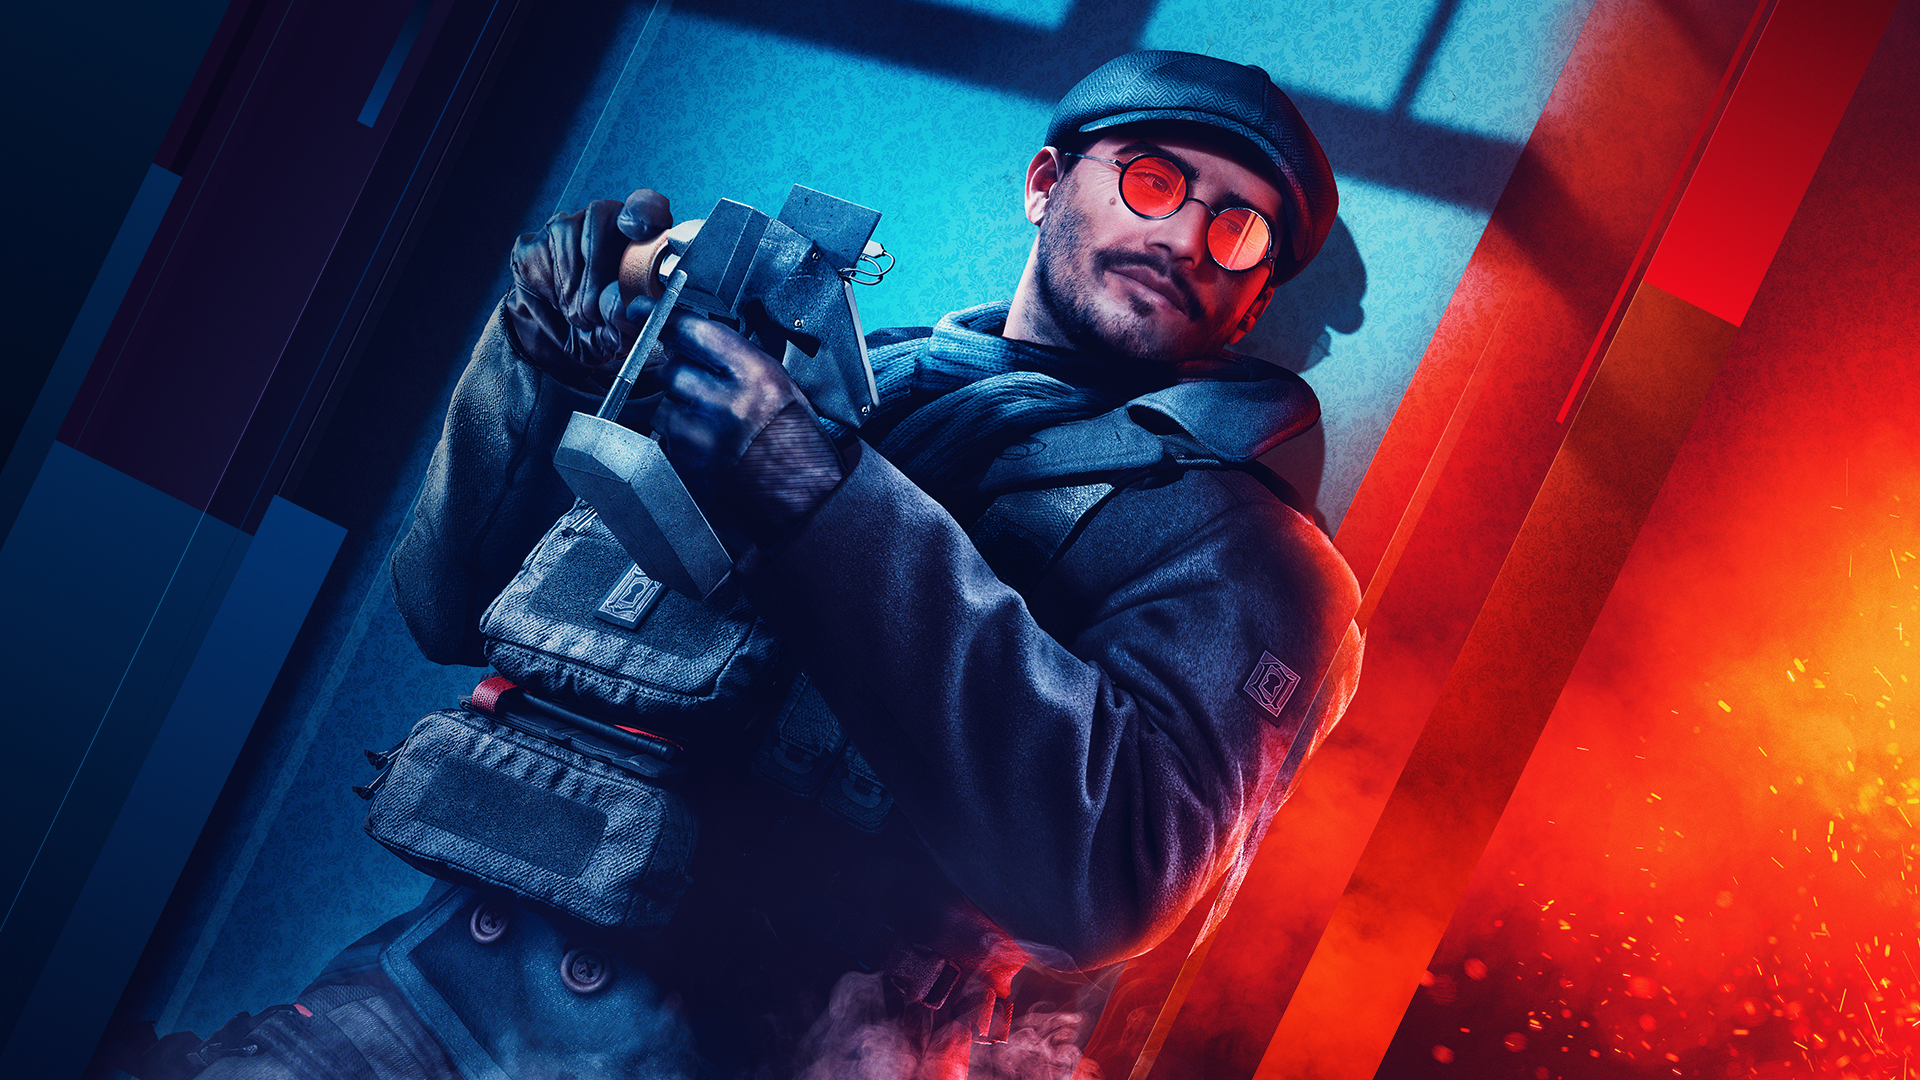 Tom Clancy’s Rainbow Six® Siege Reveals First Content of Year 6 with Crimson Heist